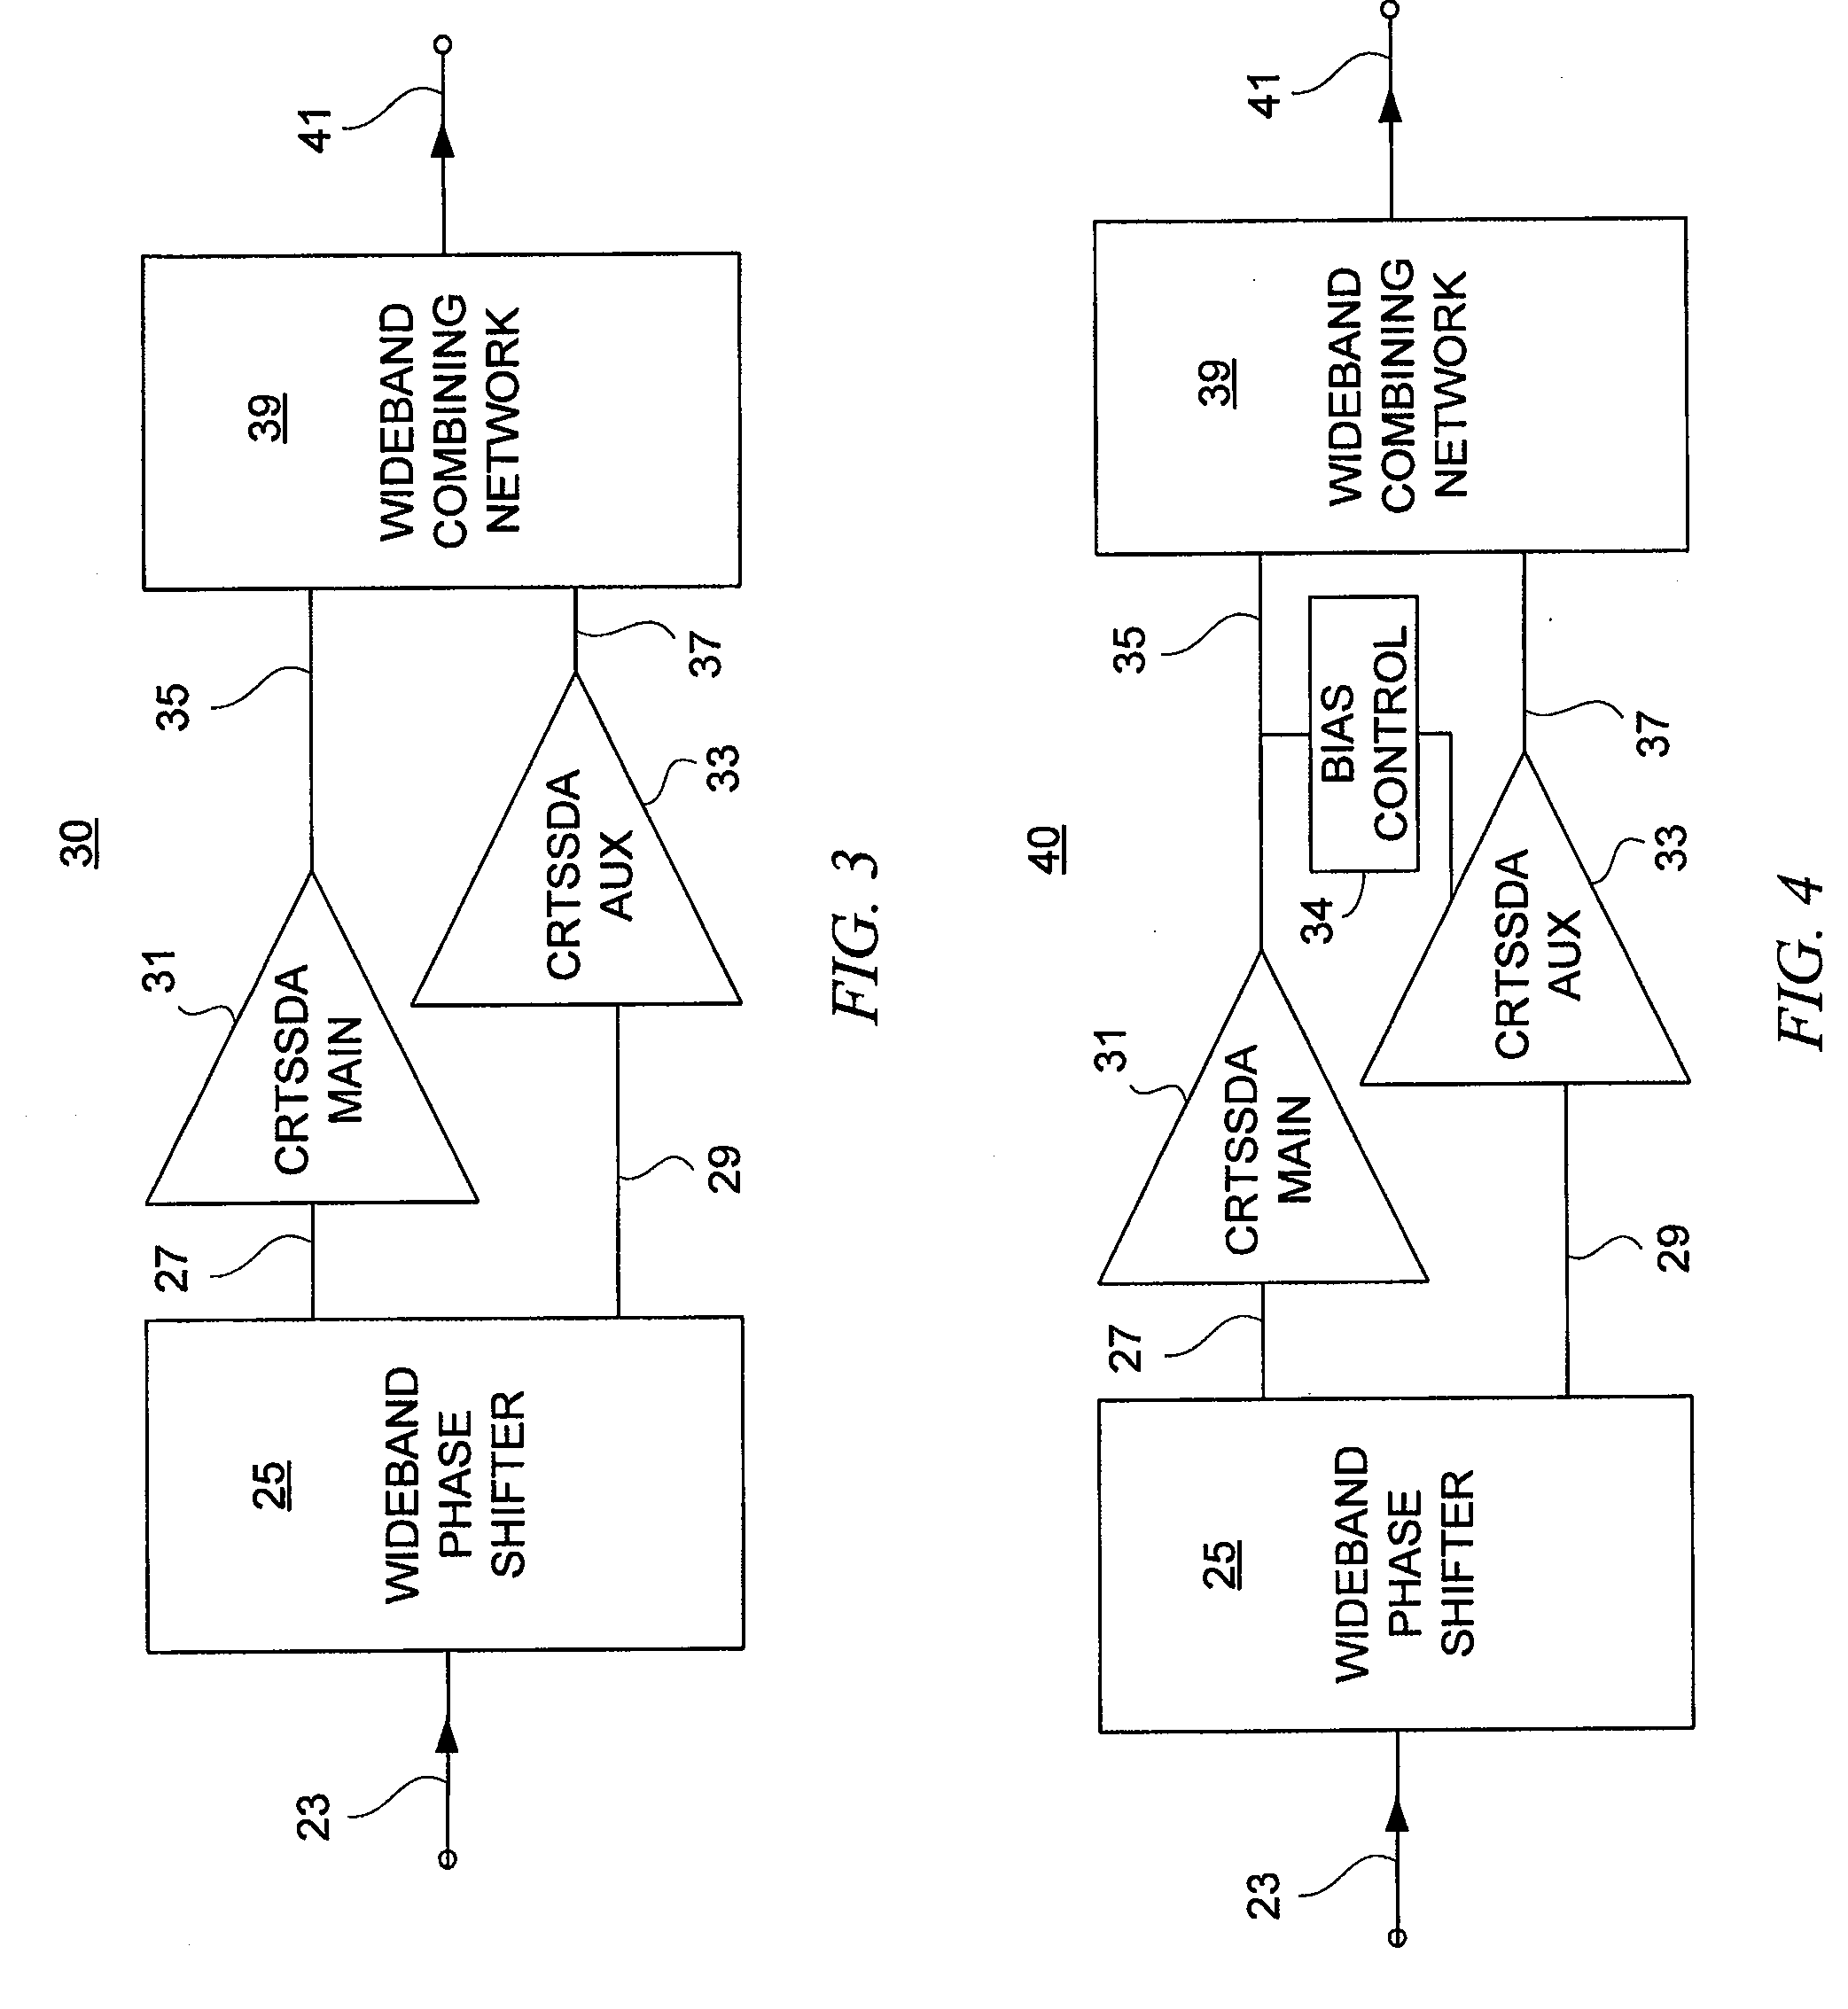 Distributed doherty amplifiers